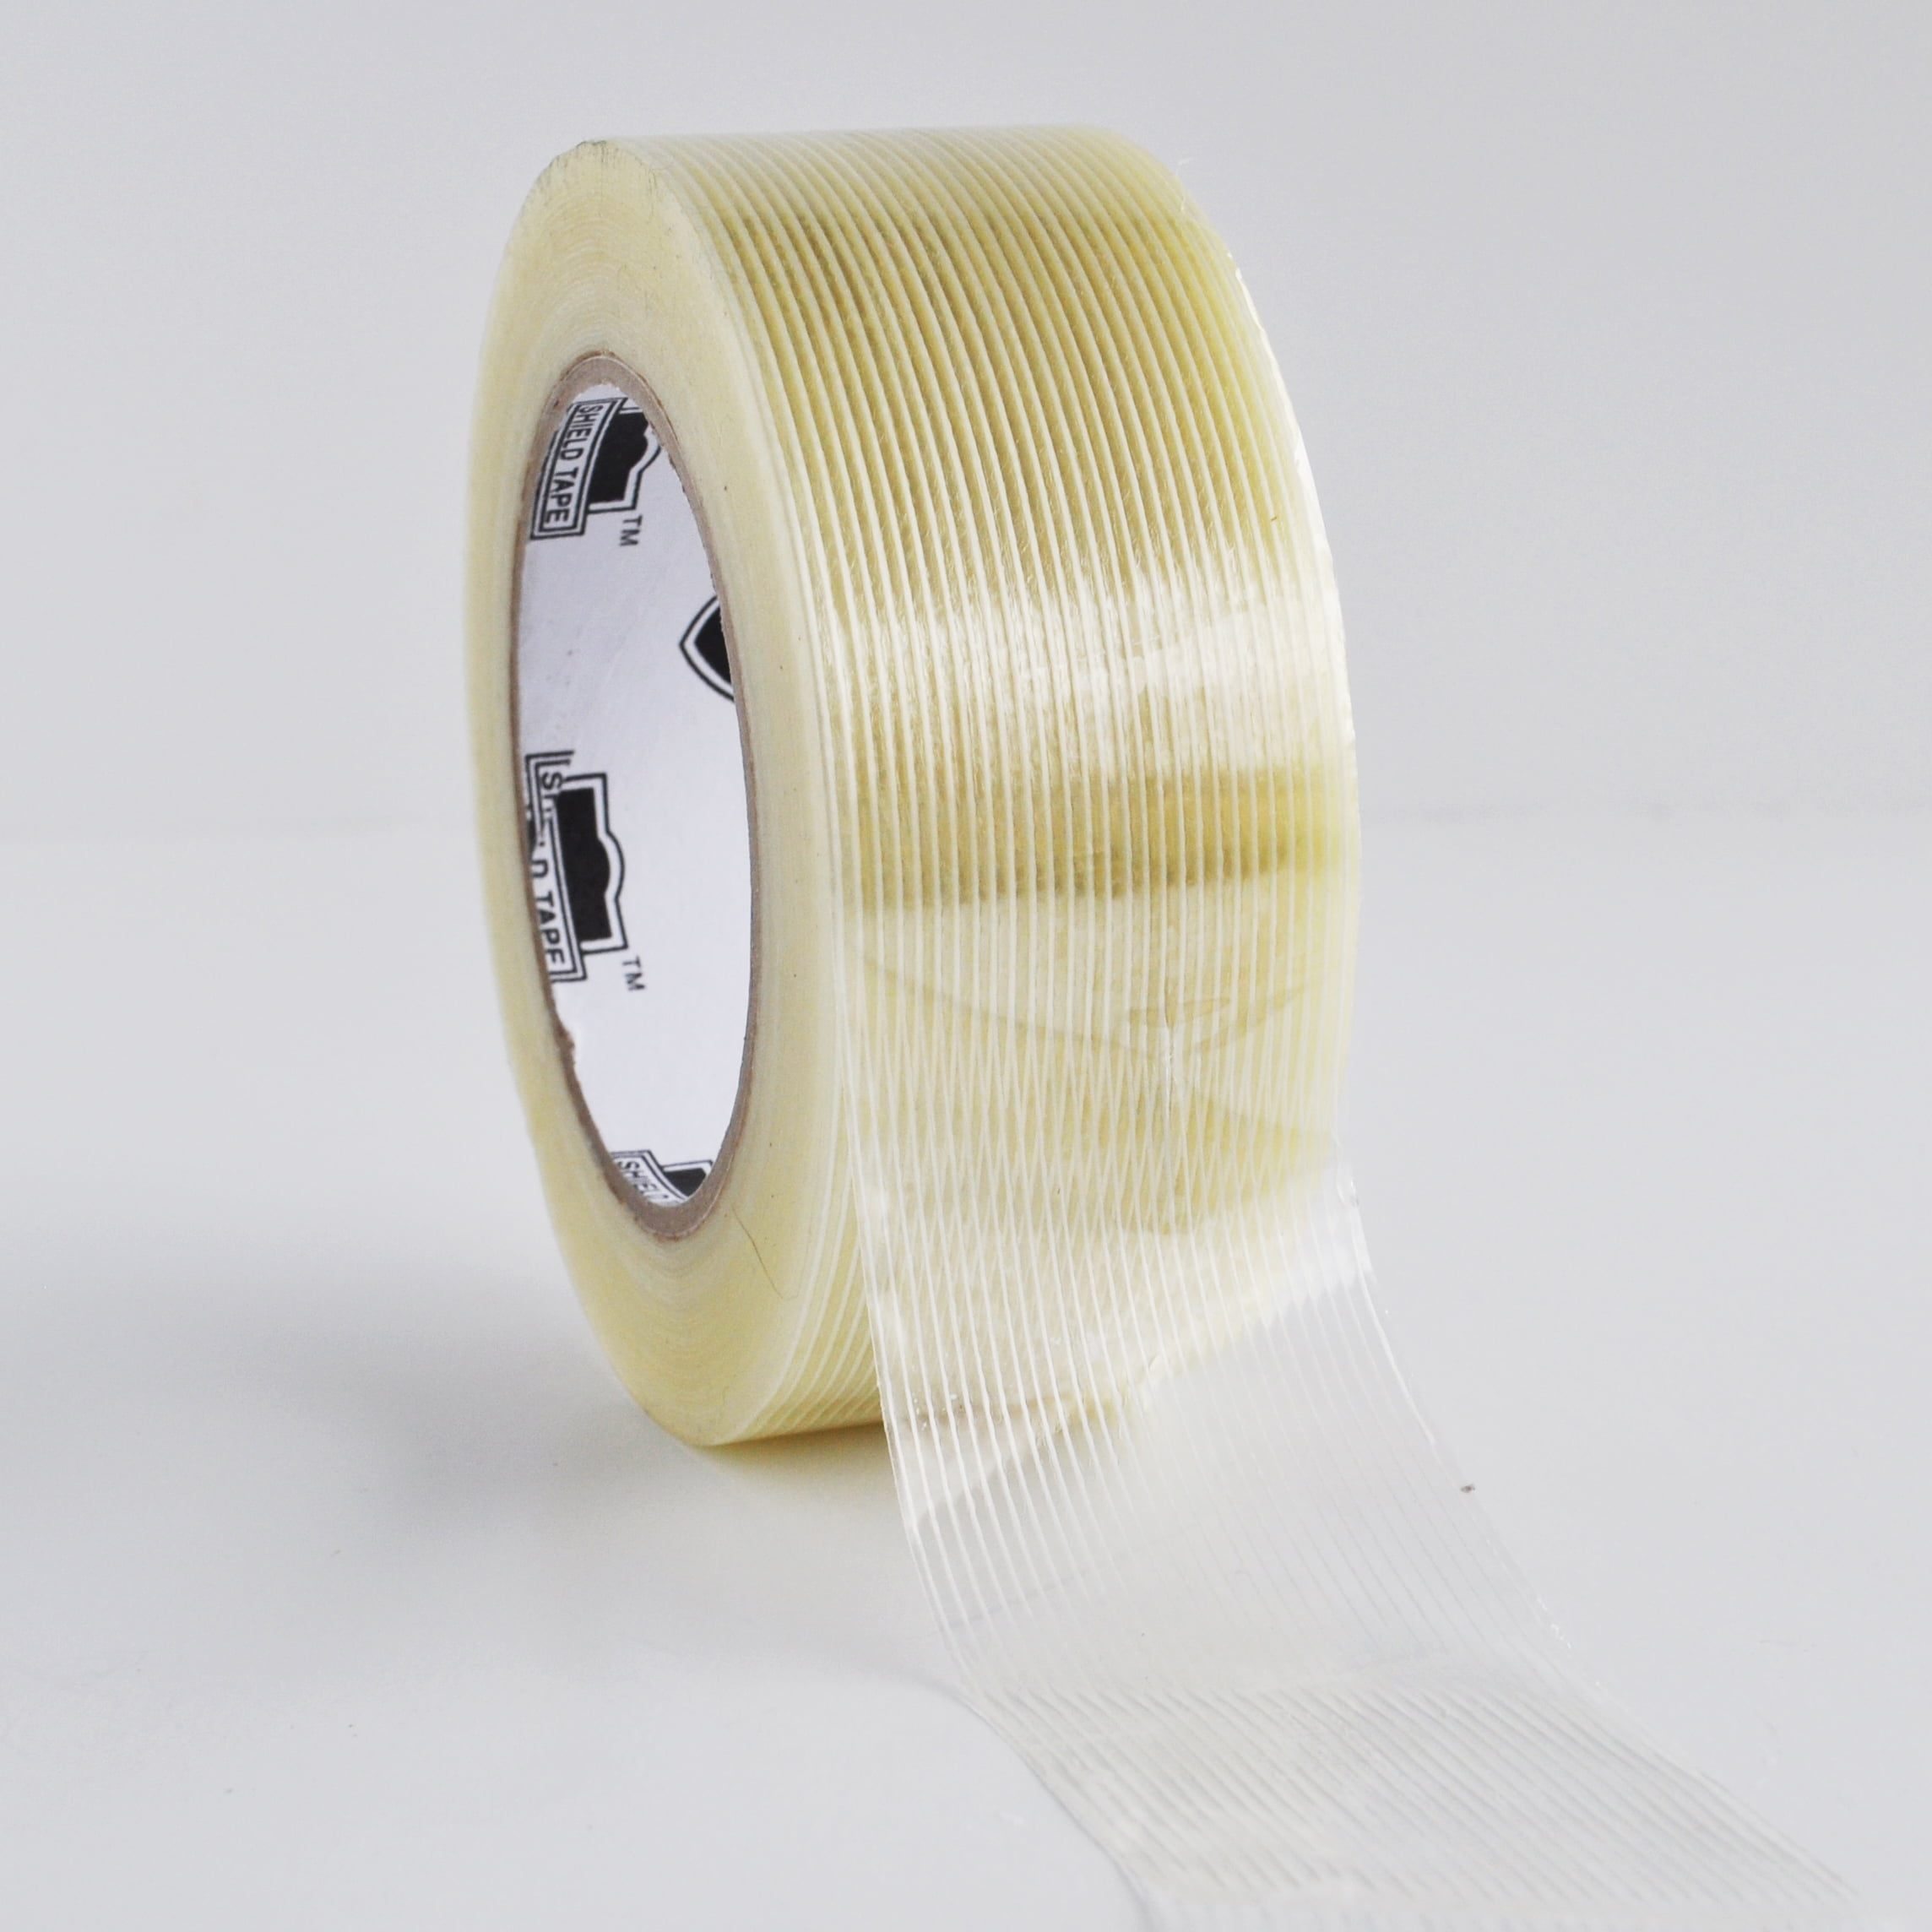 24 Rolls 2" x 60 YDS Fiberglass Reinforced Filament Strapping Packing Tape Clear 